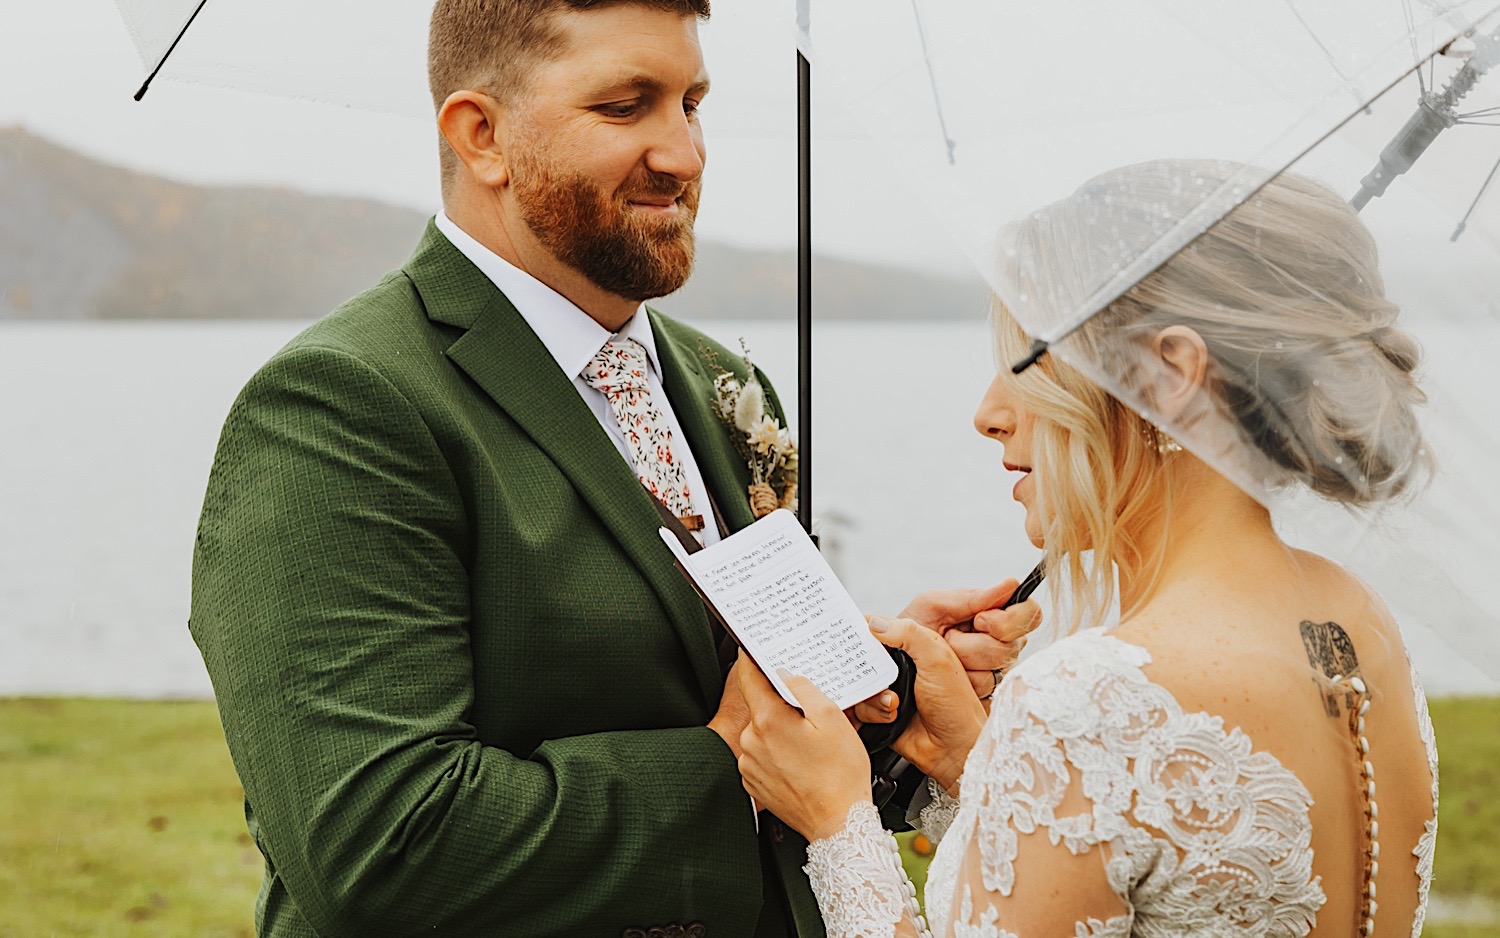 A groom smiles as the bride reads her vows to him while the two stand under umbrellas on a rainy day in Vermont next to Lake Bomoseen